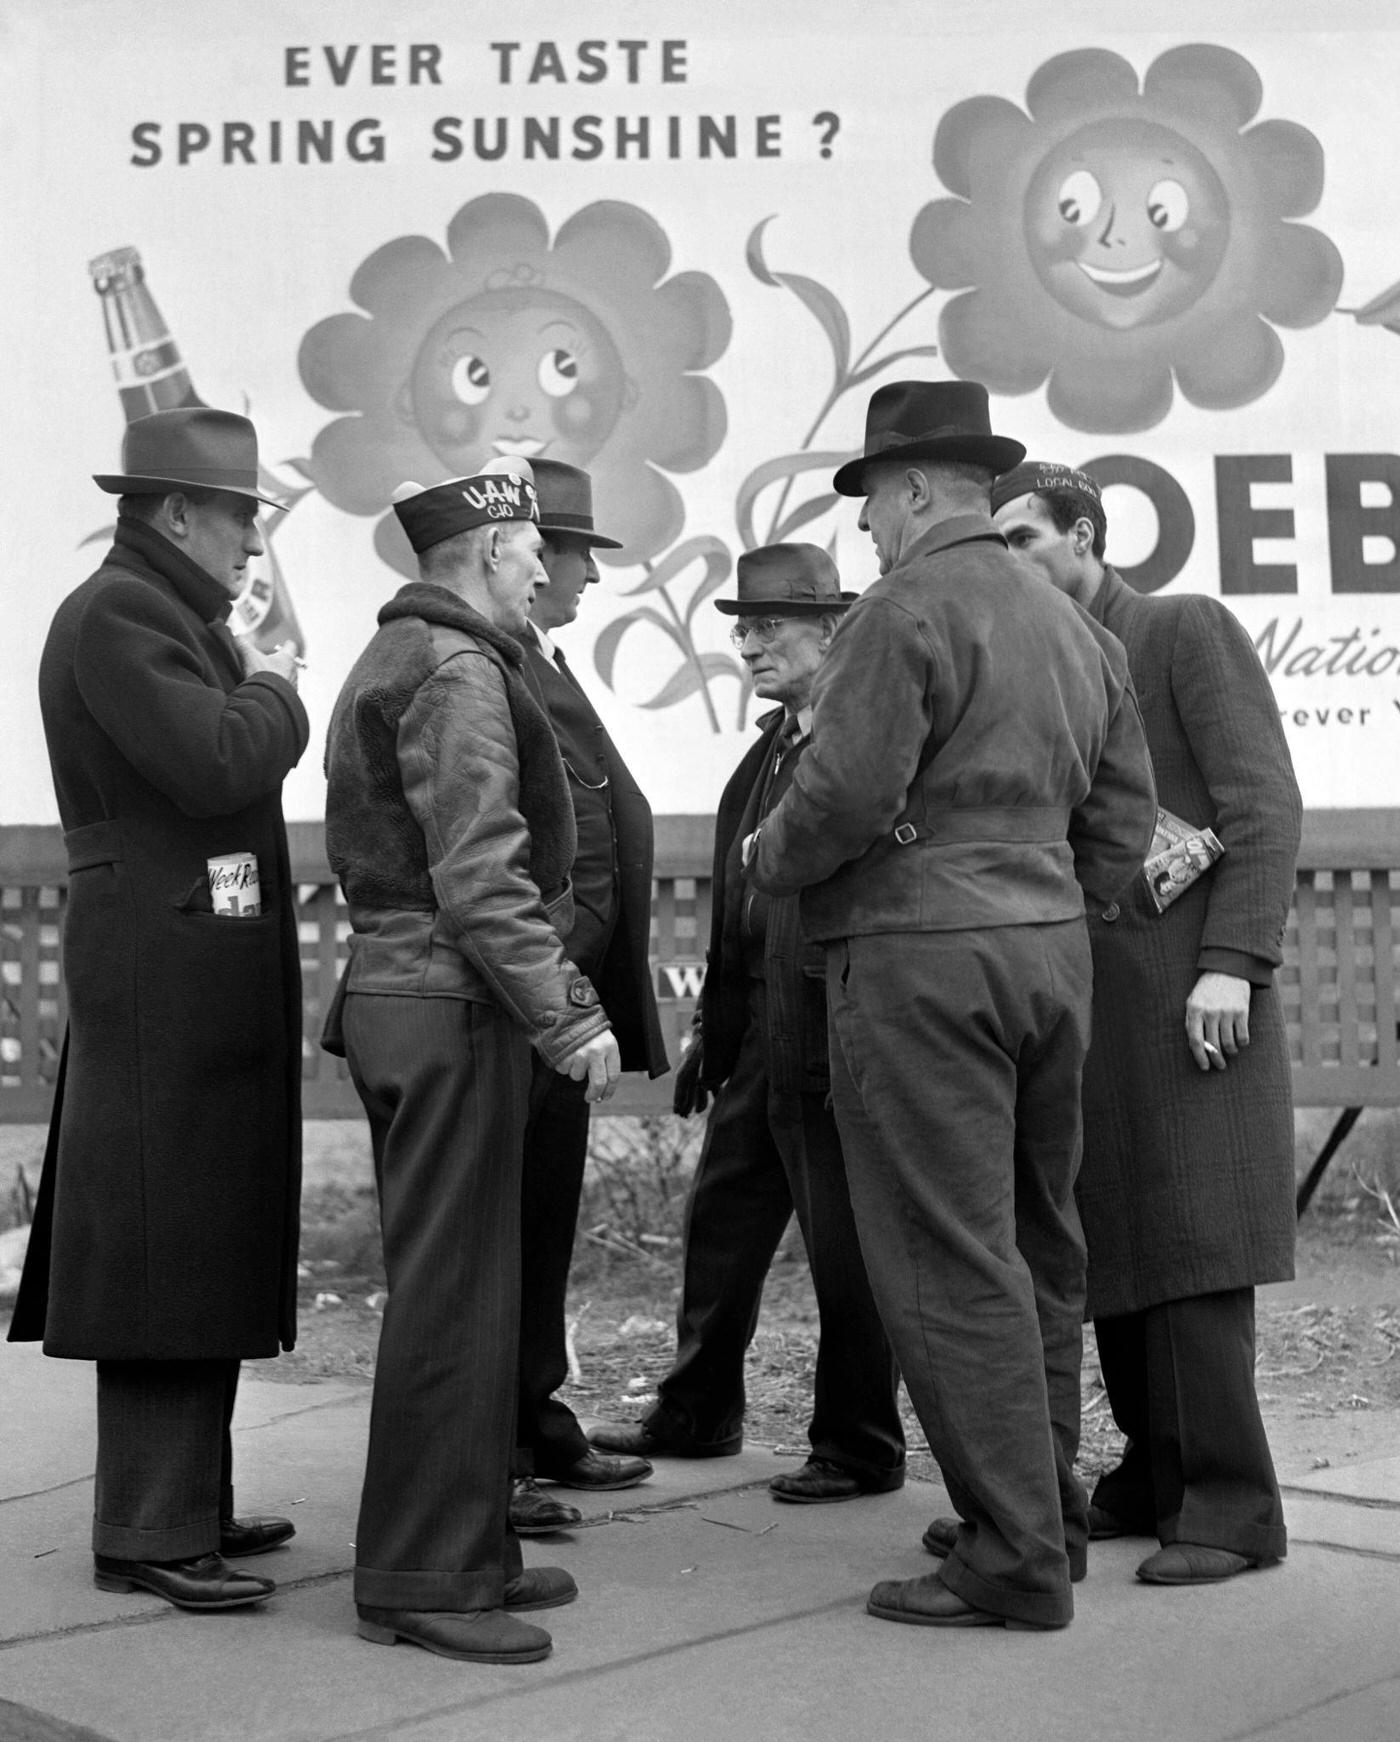 Members of the United Auto Workers (UAW) union meet during the Detroit Ford Motor Company Labor strike in Dearborn, Michigan, April 1941.